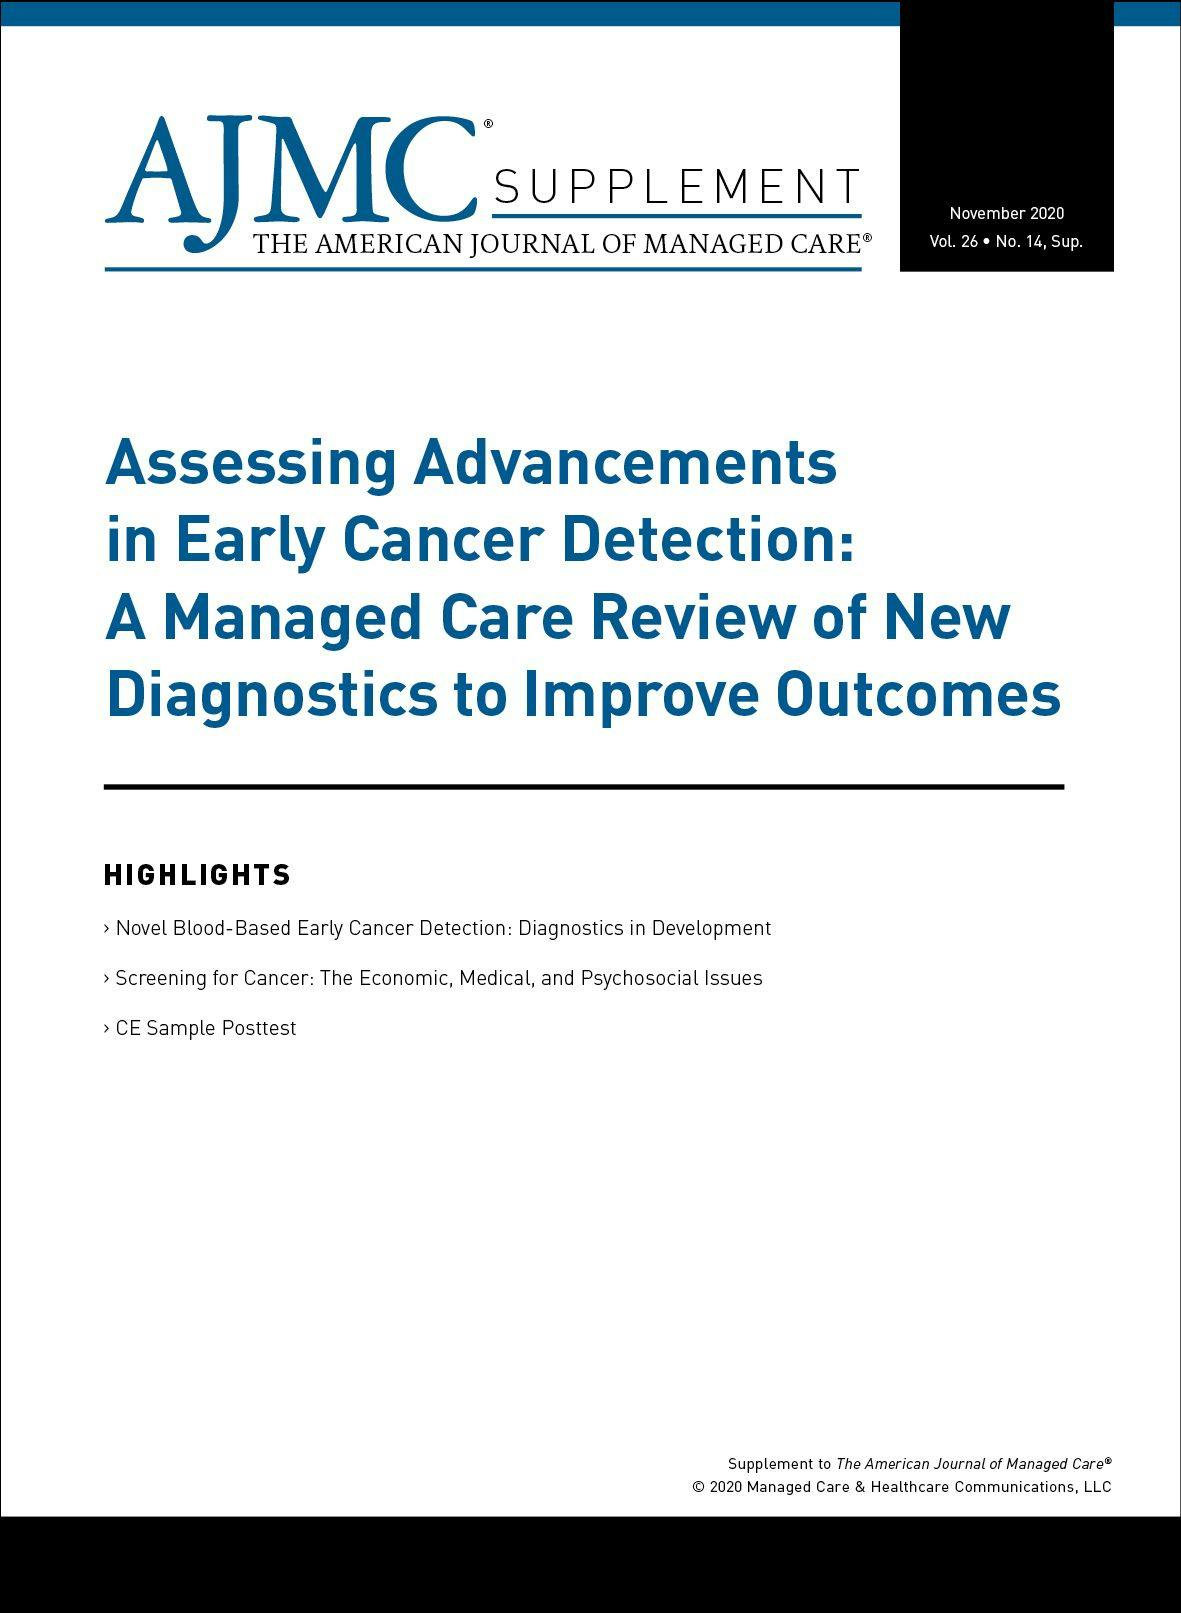 Assessing Advancements in Early Cancer Detection: A Managed Care Review of New Diagnostics to Improve Outcomes